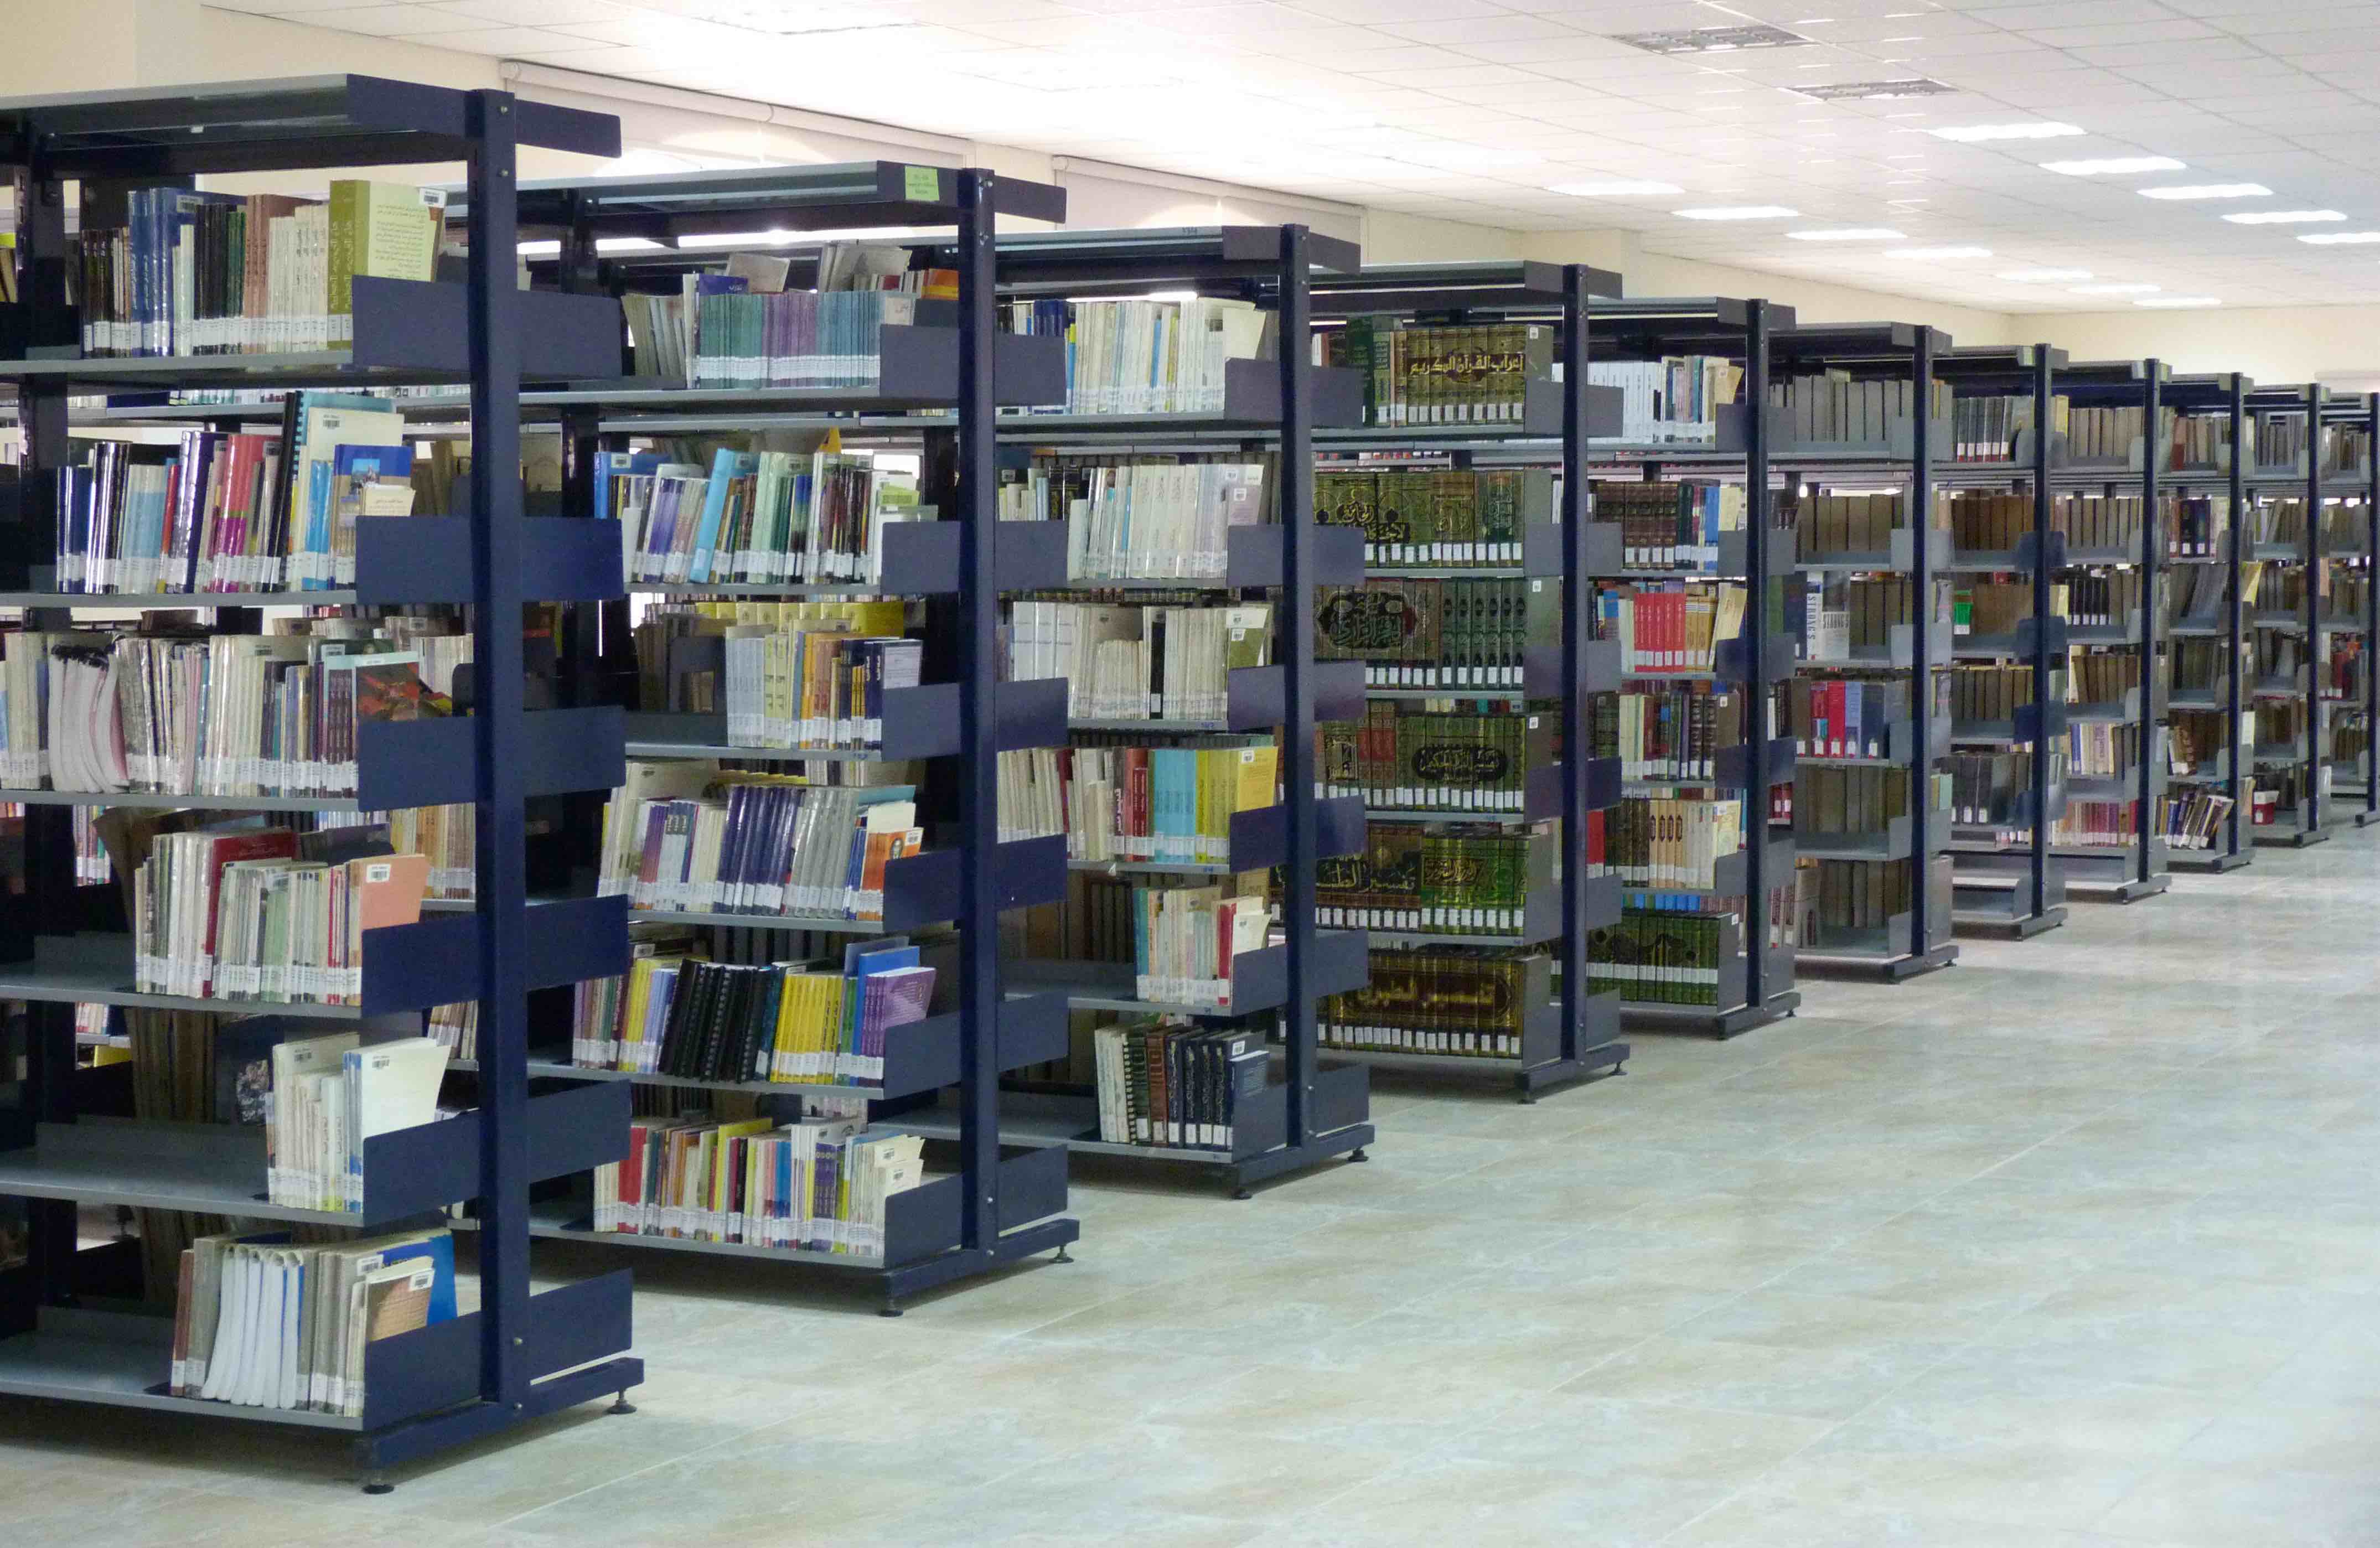 JETS Library